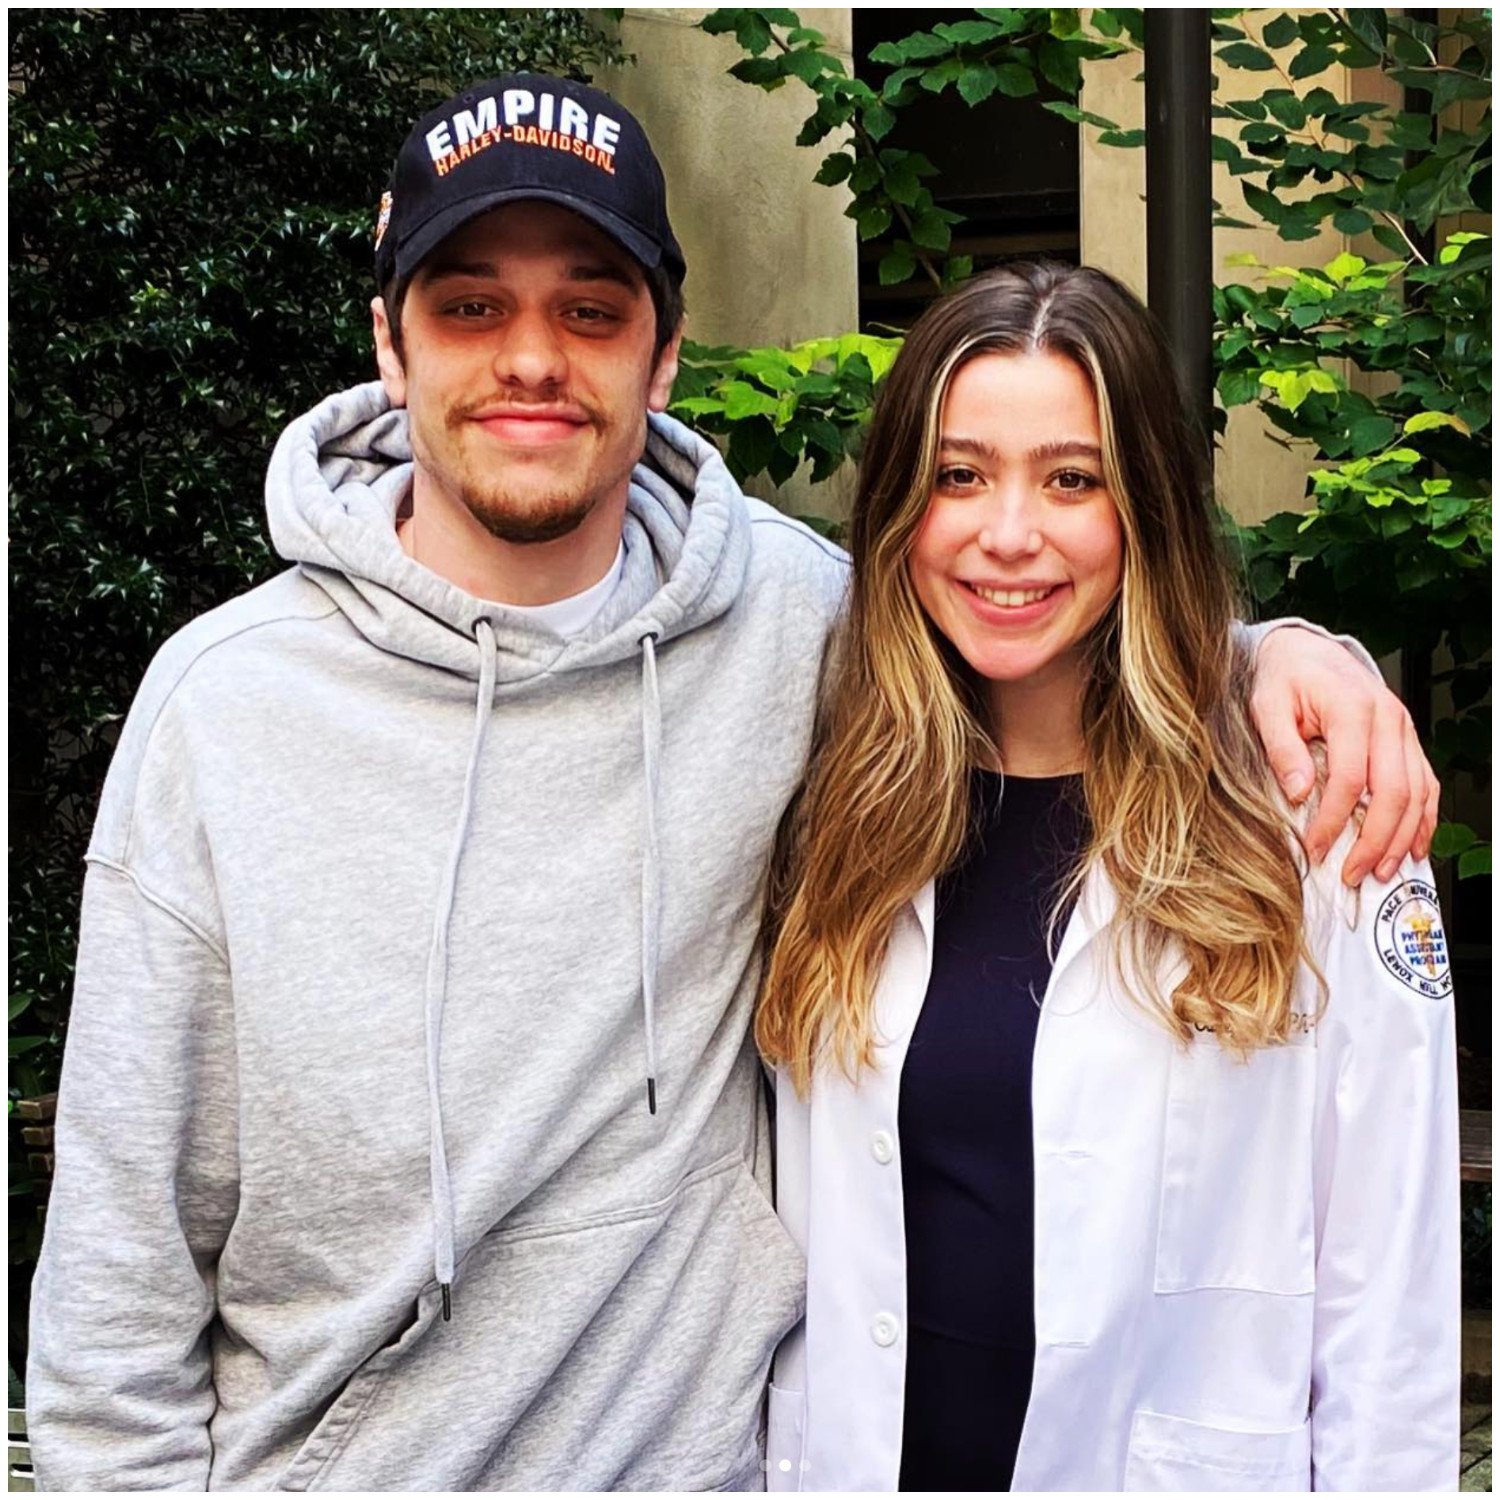 Pete Davidson and his little sister Casey Davidson lost their firefighter father on September 11, and are thought to be extremely close. Photo: @amyymarie118/Instagram